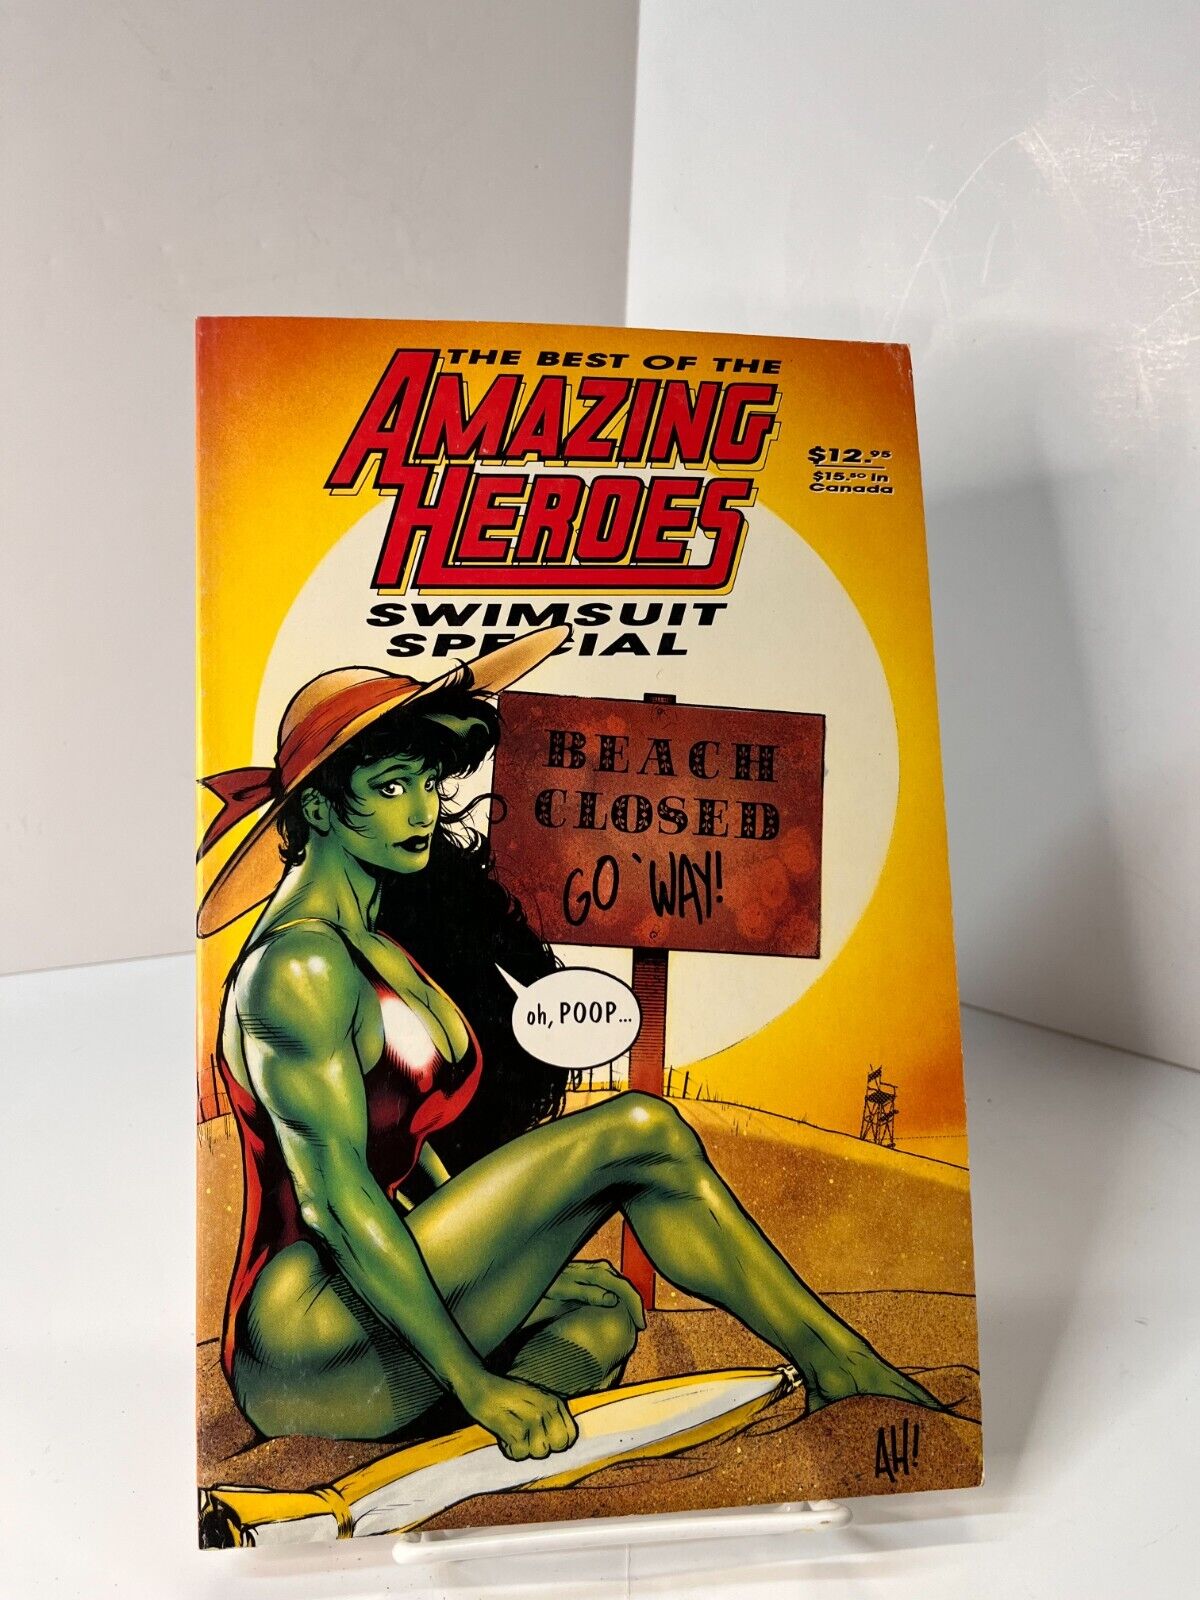 The Best of the Amazing Heroes Swimsuit Special (Fantagraphics Books 1993)